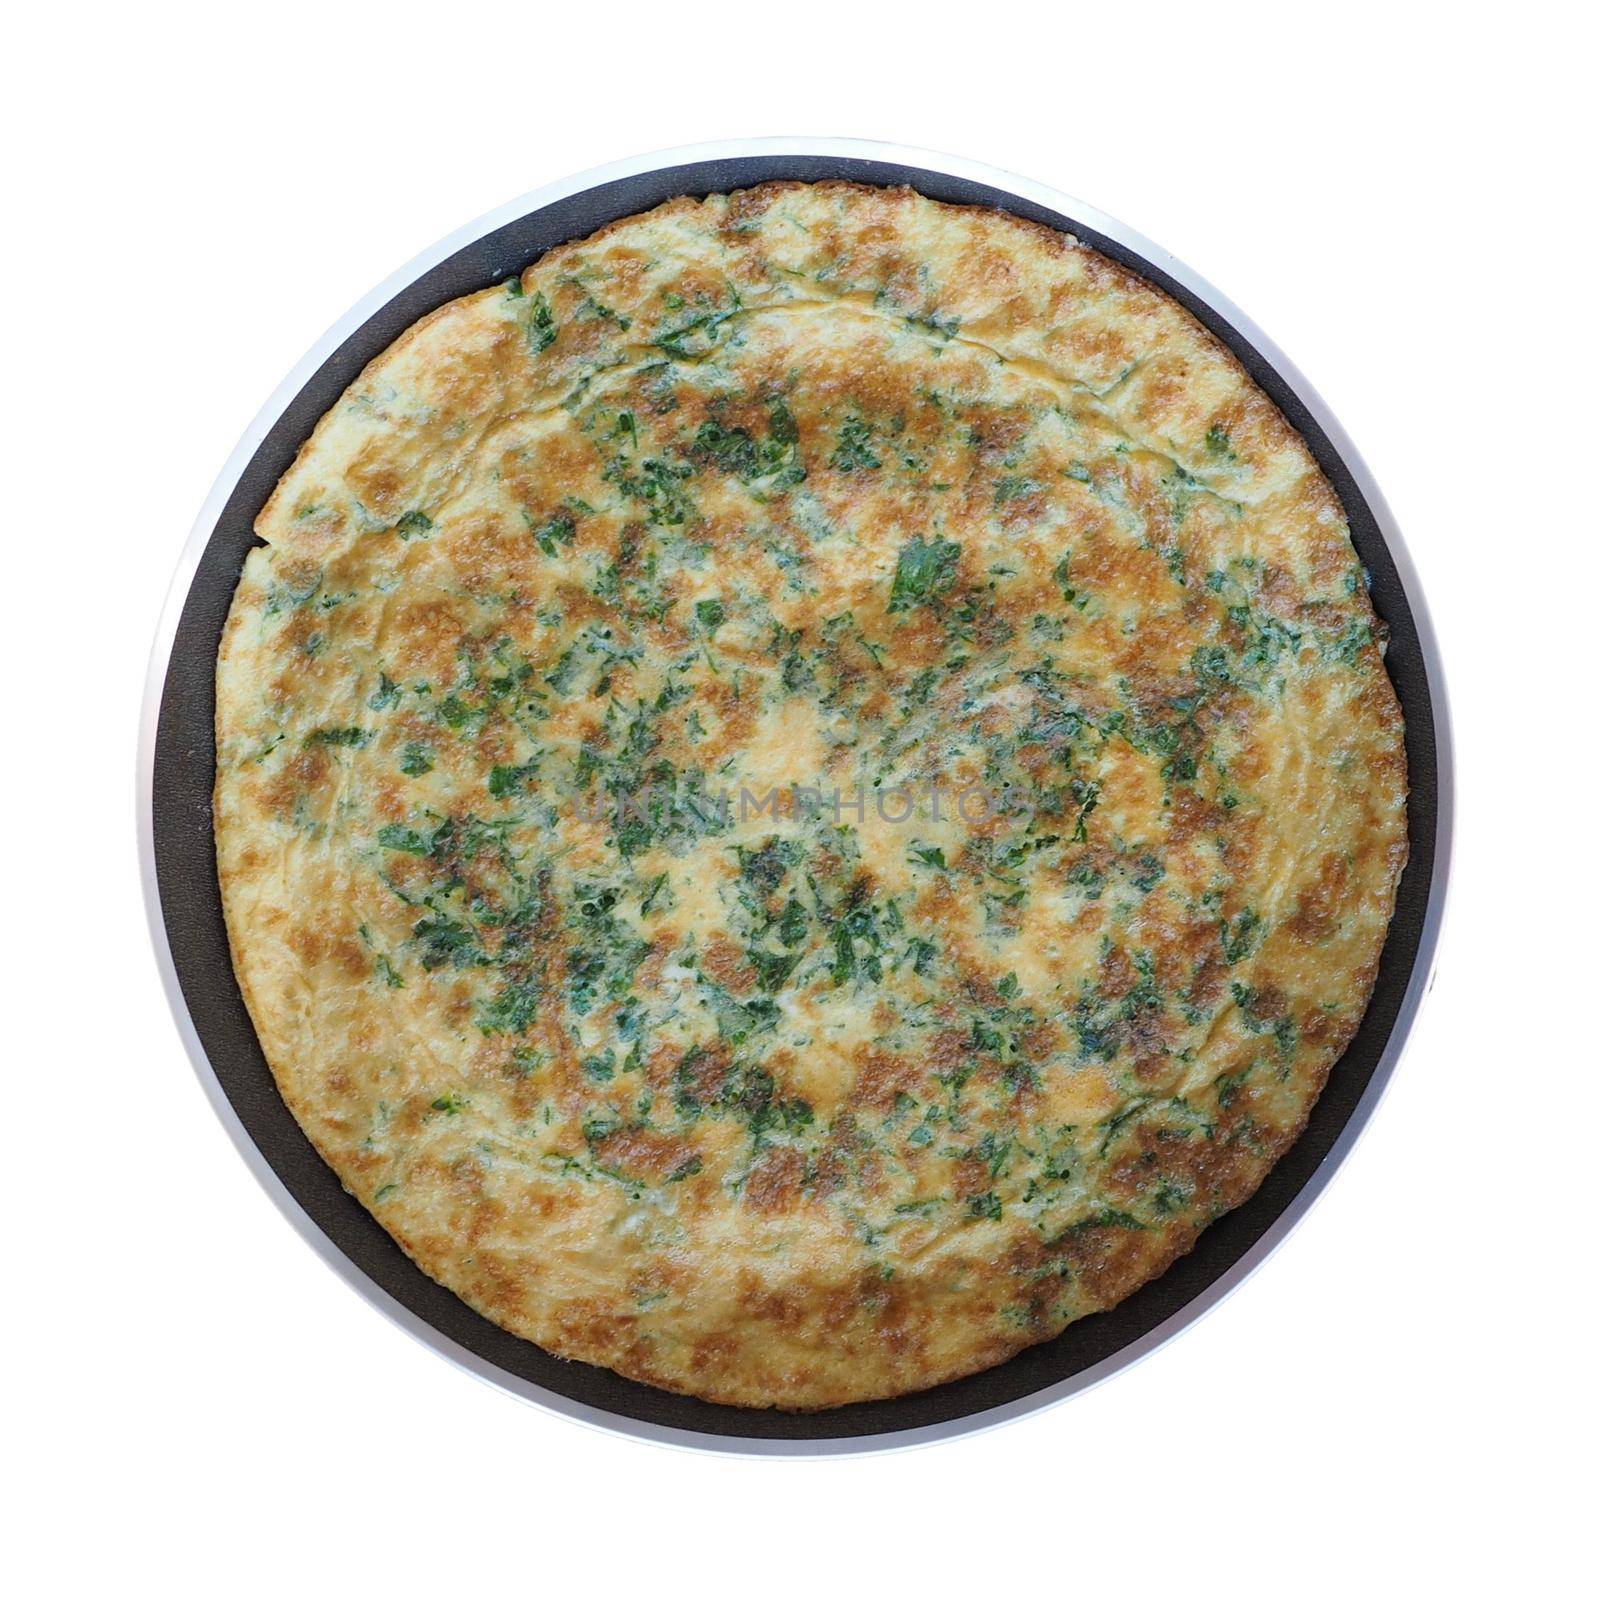 omelet with parsley isolated over white background